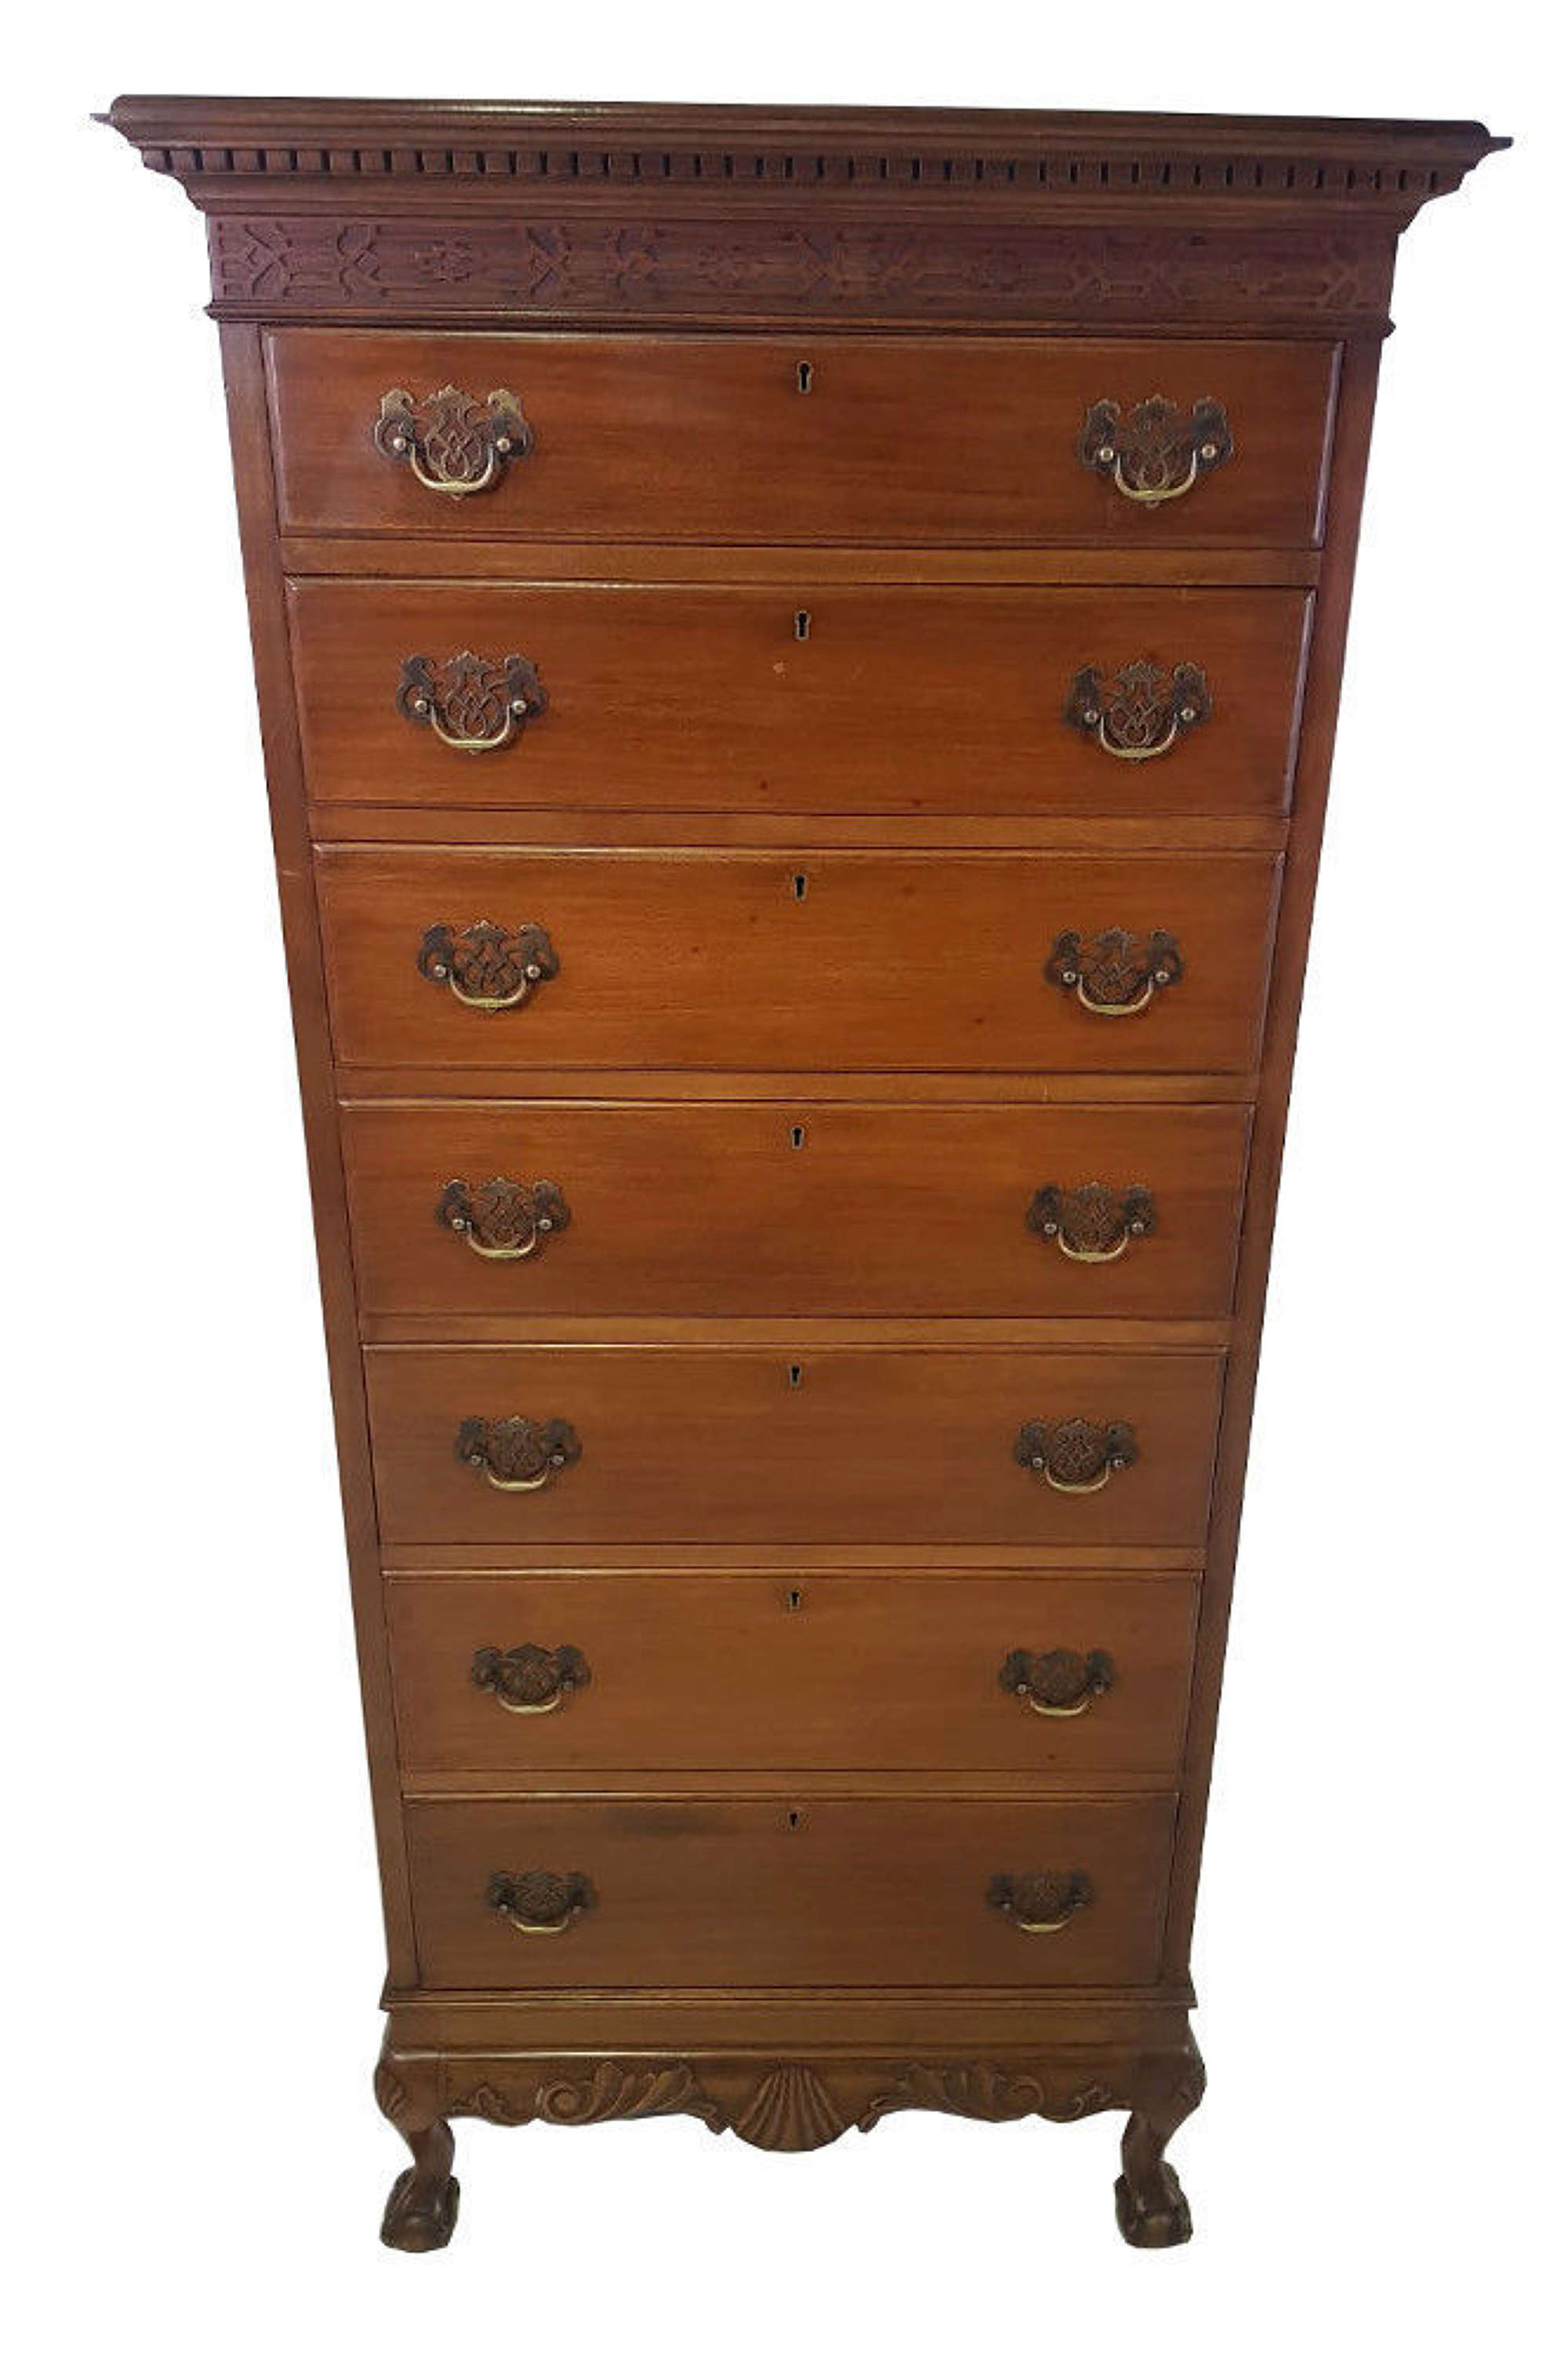 1920s Mahogany Tall Boy After Chippendale